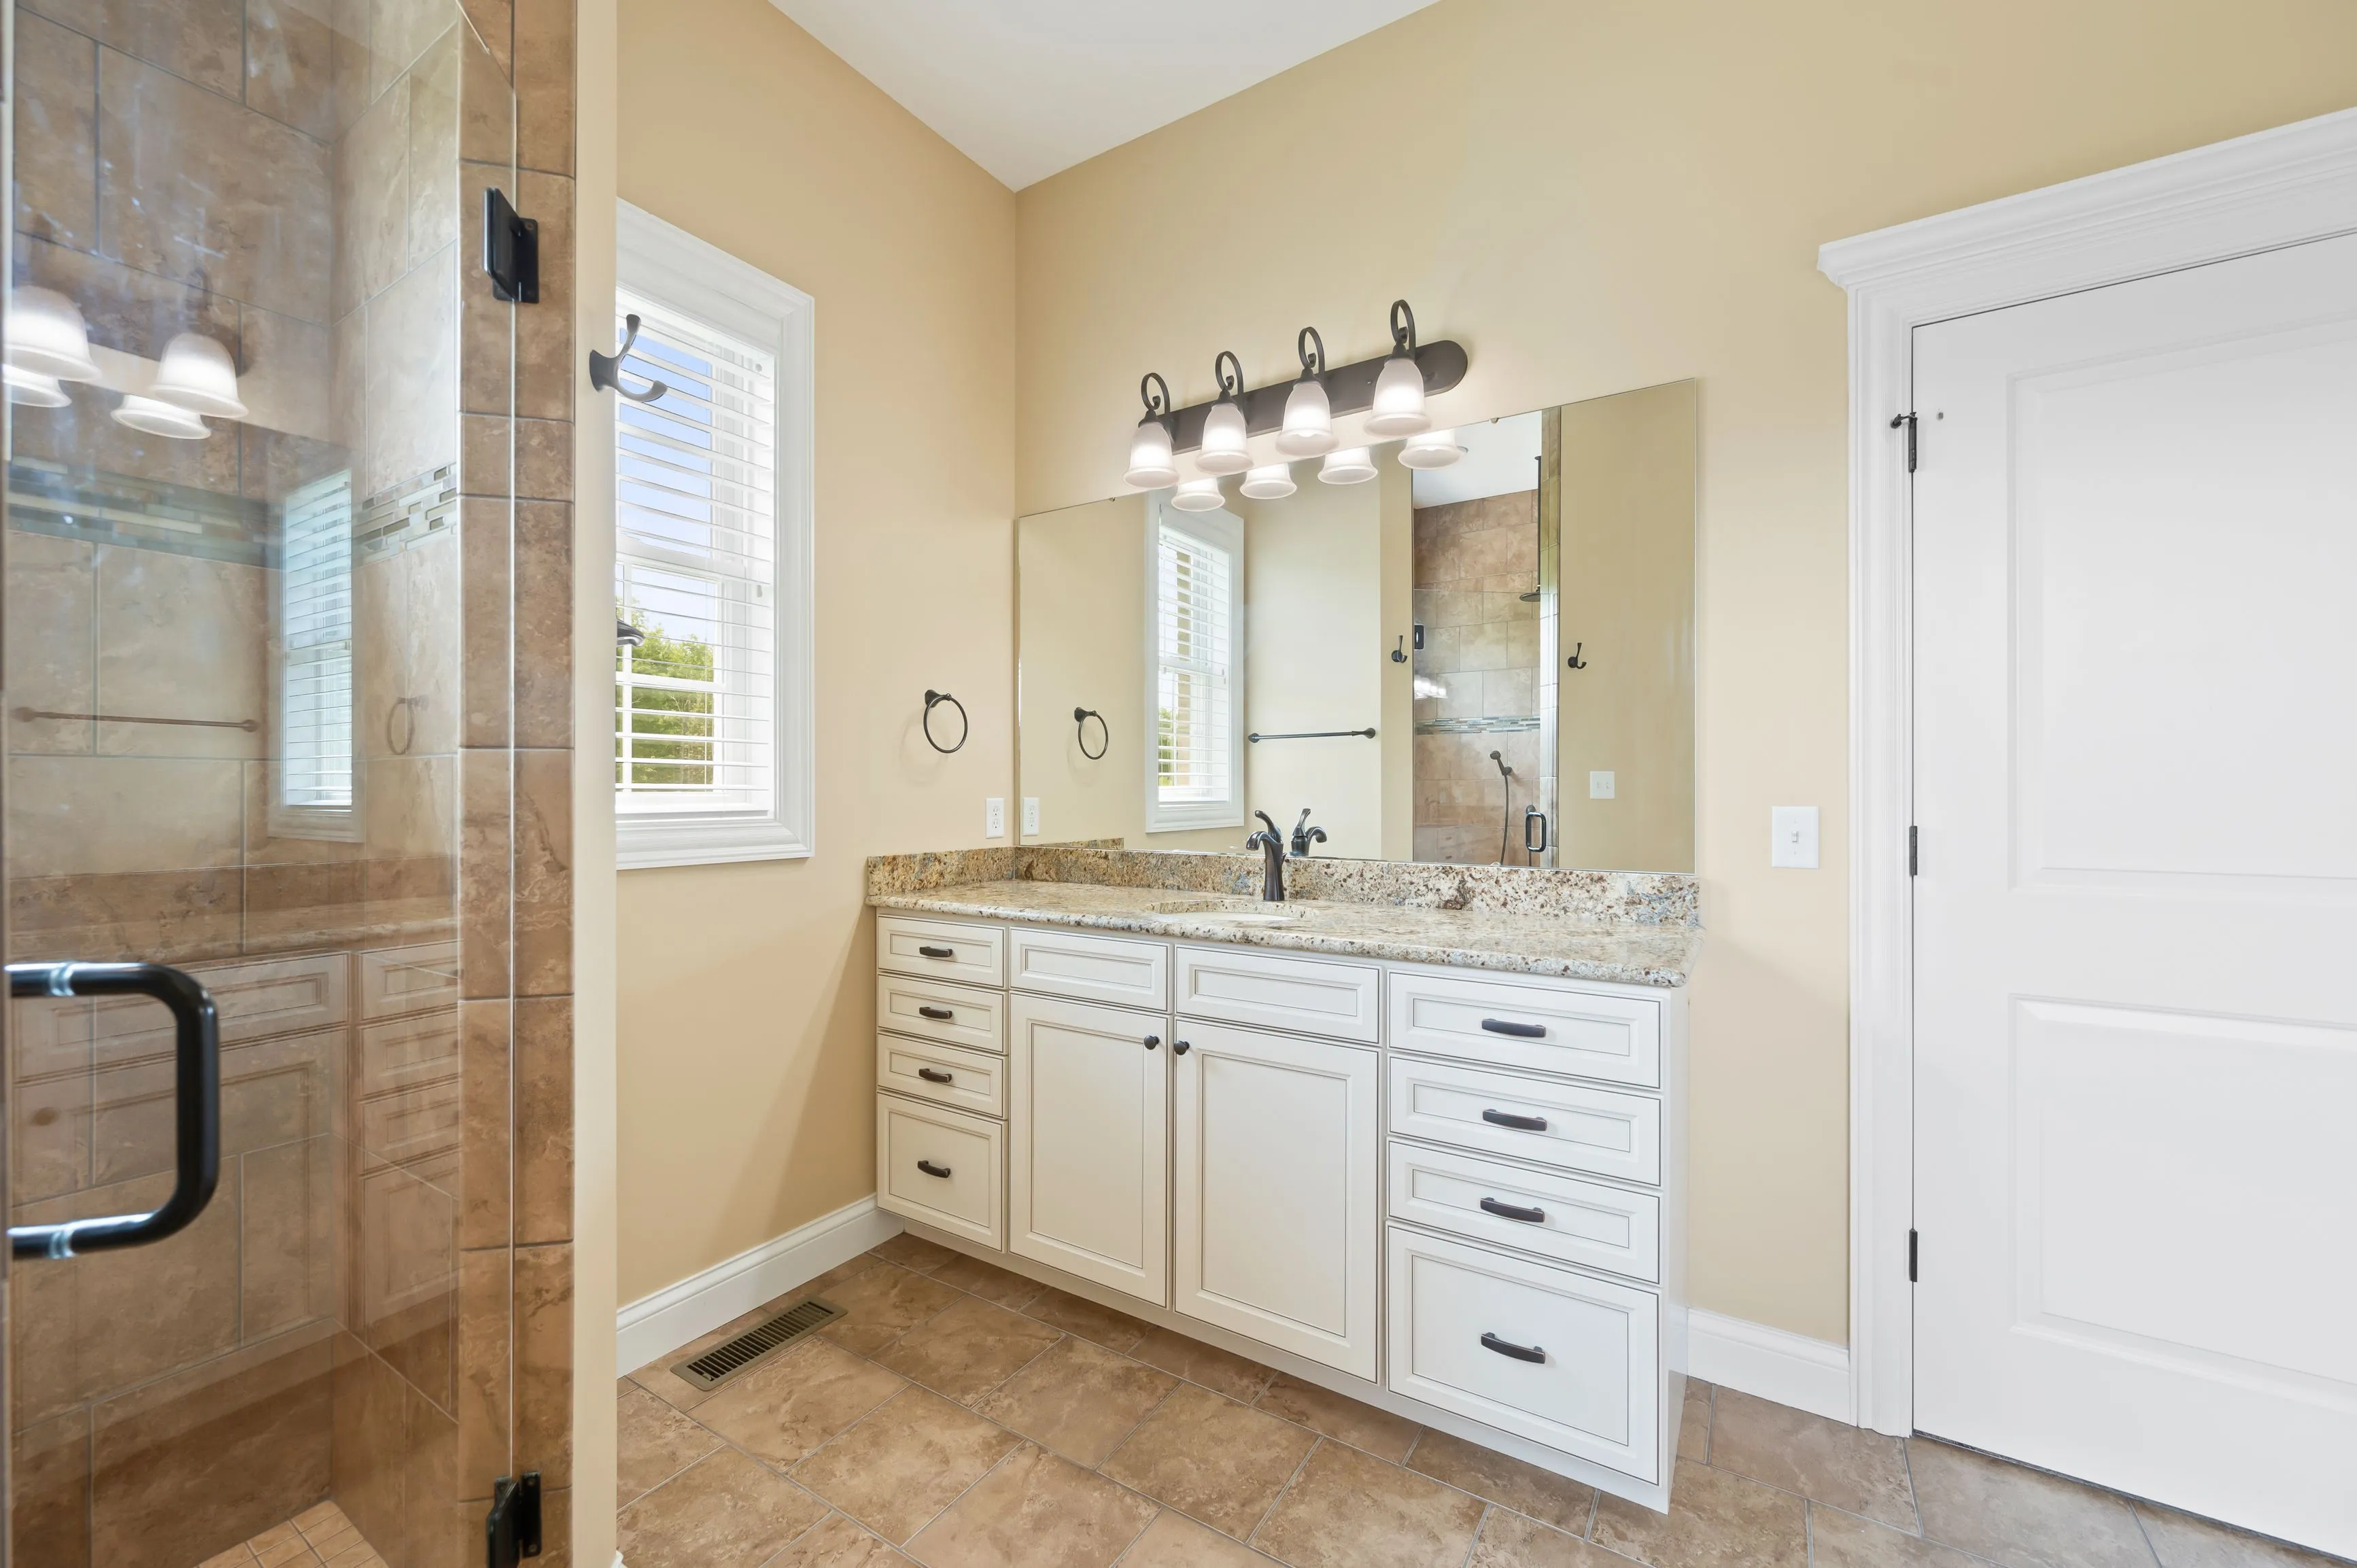 Modern bathroom interior with dual sinks, granite countertops, large mirror, and a glass-enclosed shower.